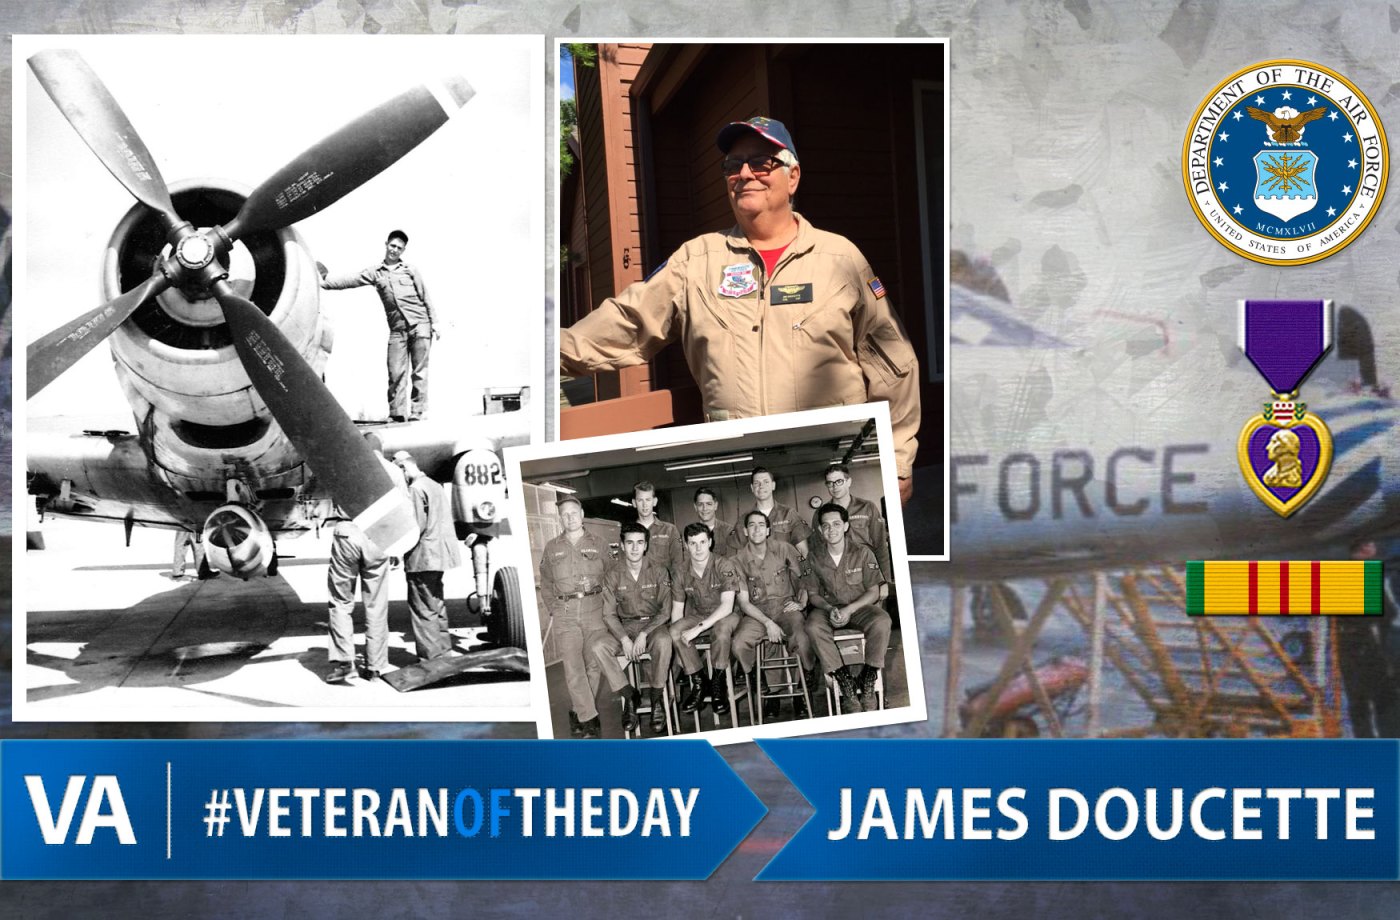 Veteran of the day James Doucette